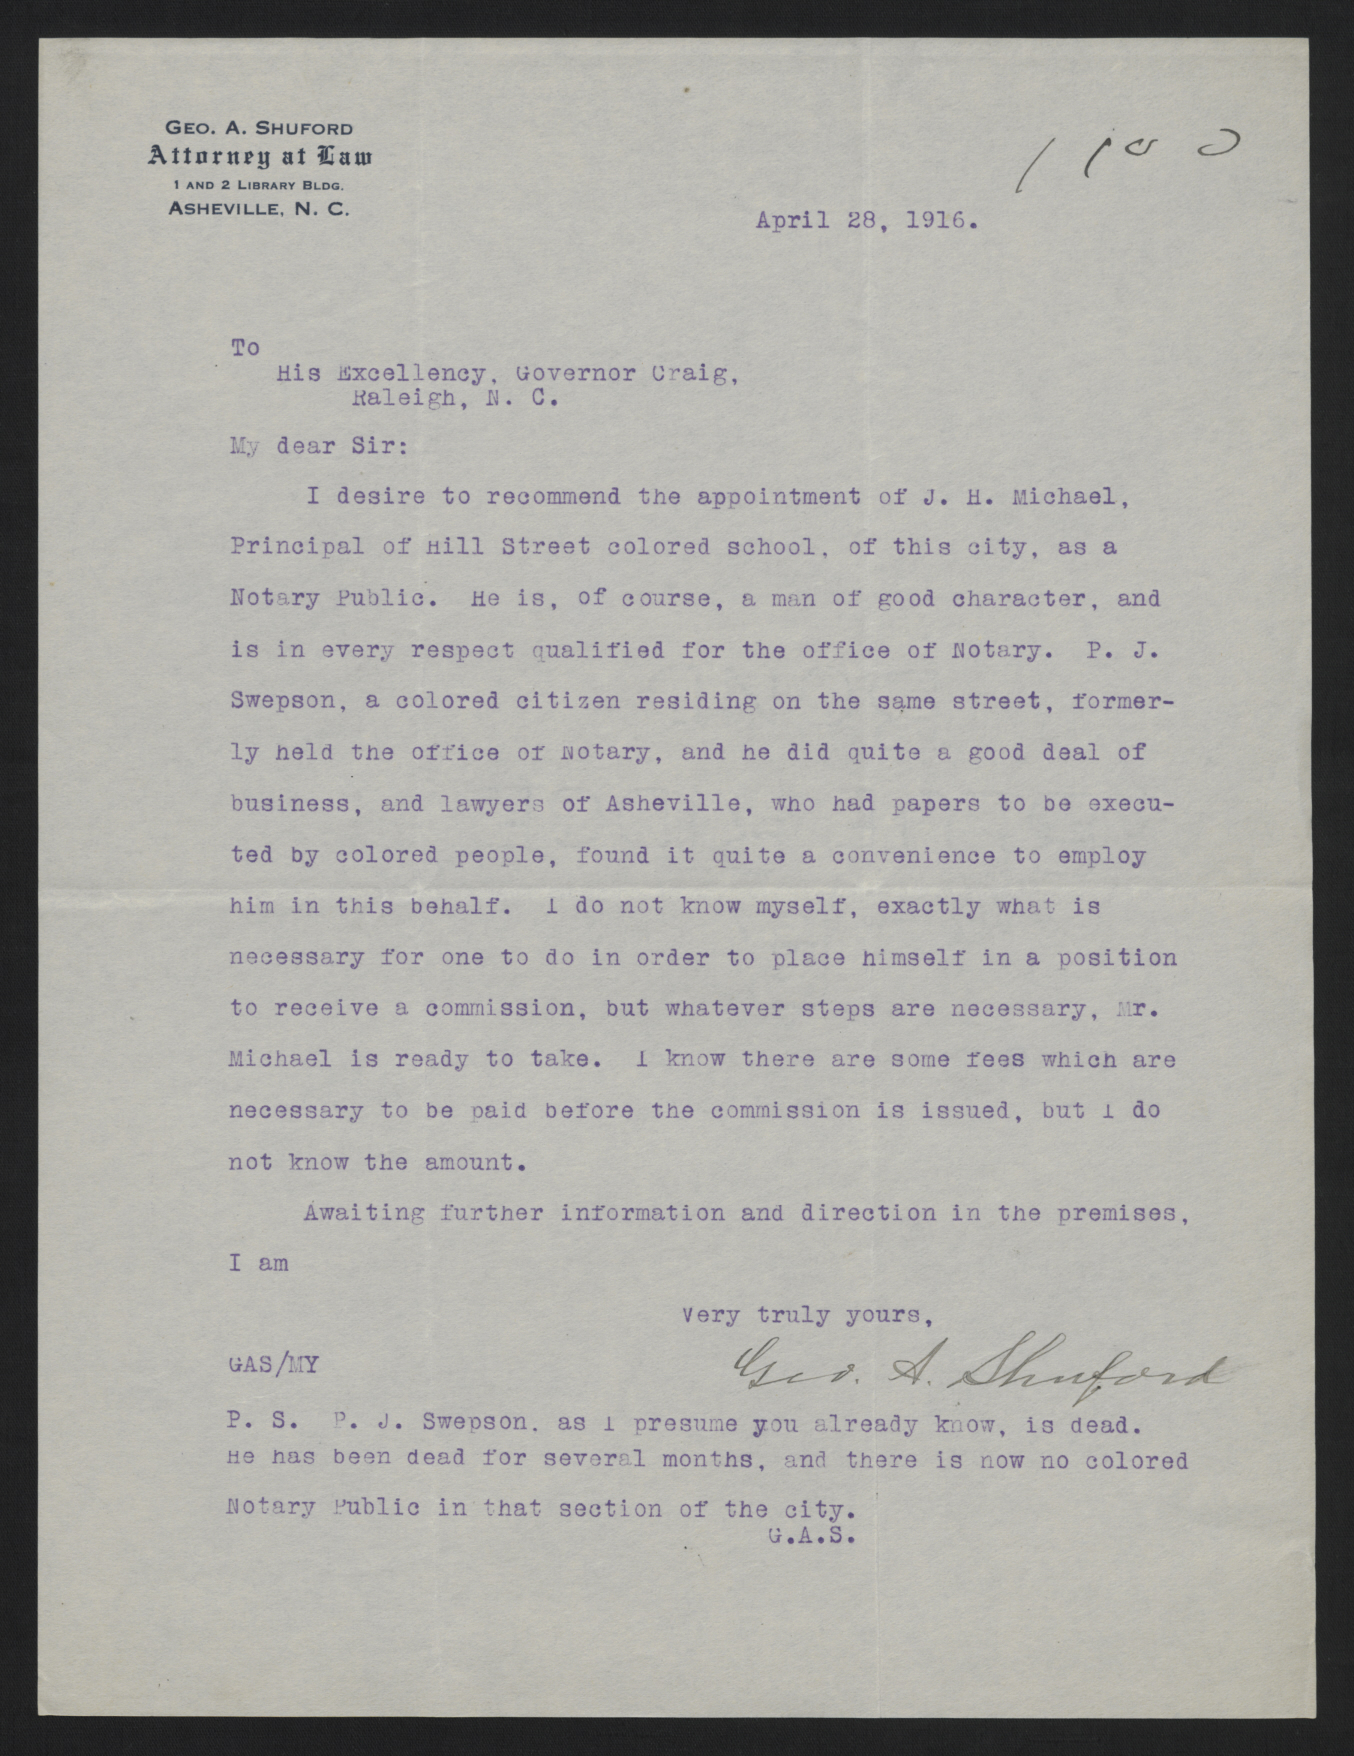 Letter from Shuford to Craig, April 28, 1916